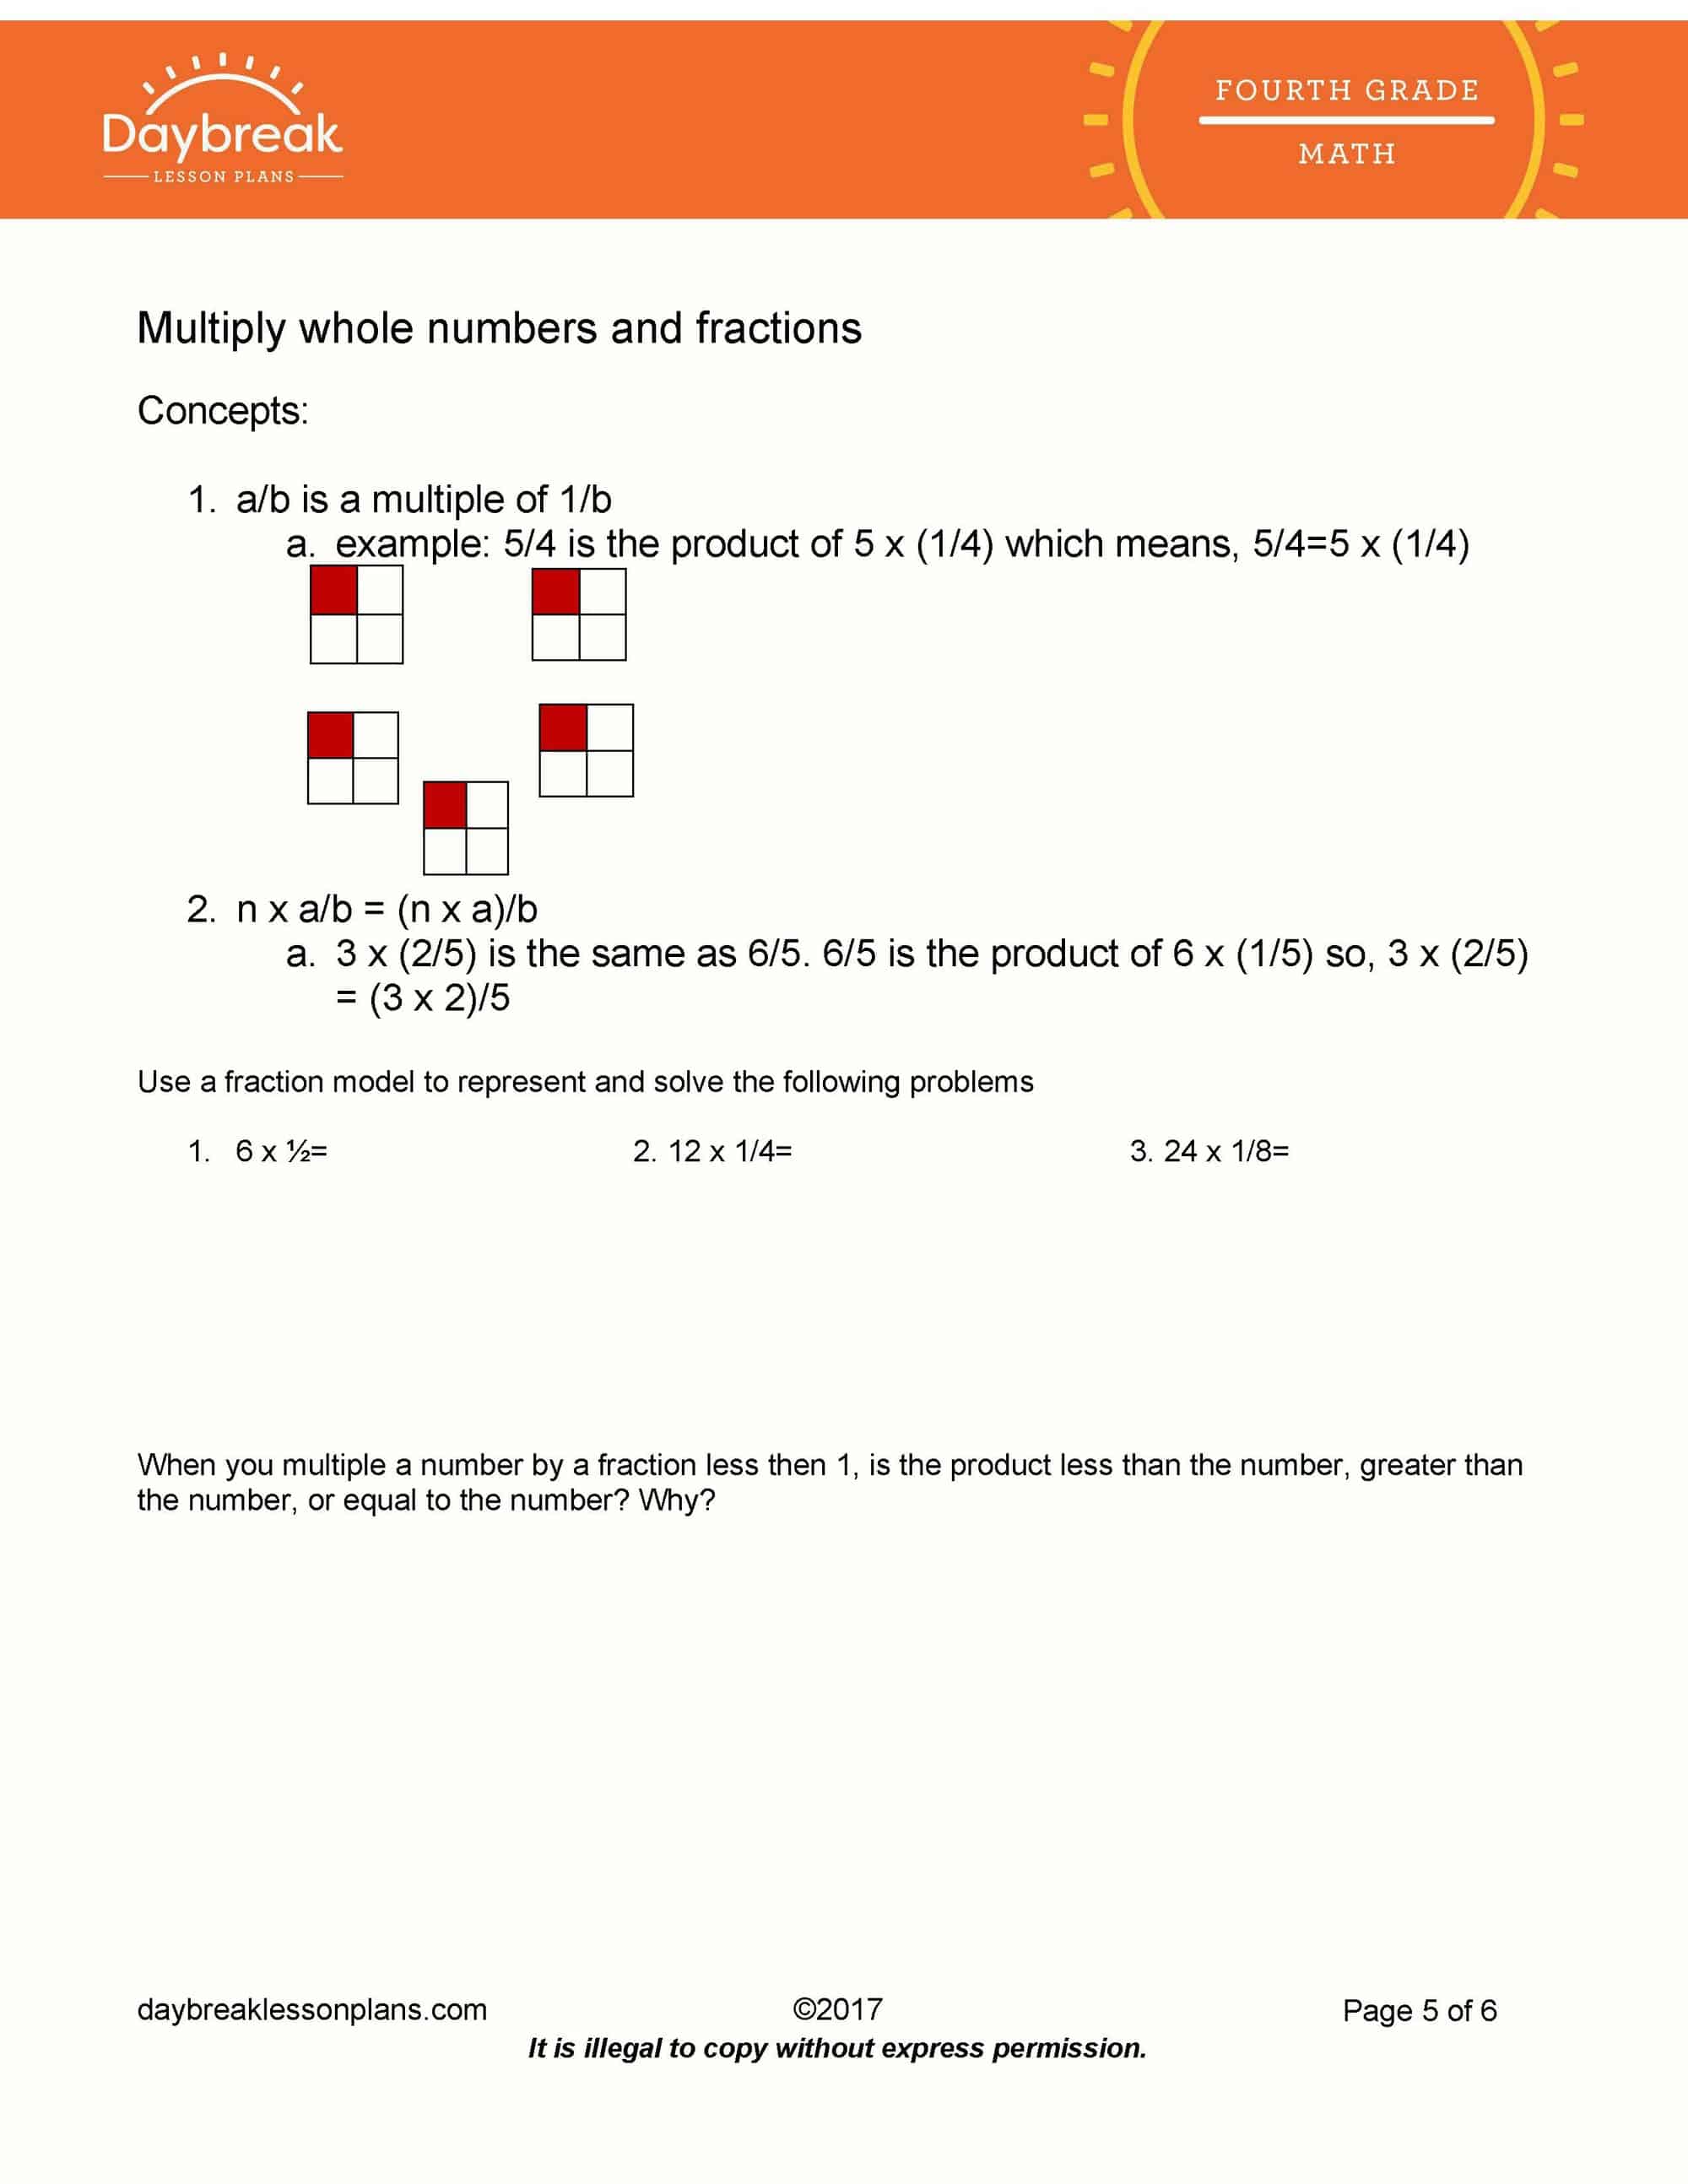 4th-grade-math-multiplication-of-fractions-by-whole-numbers